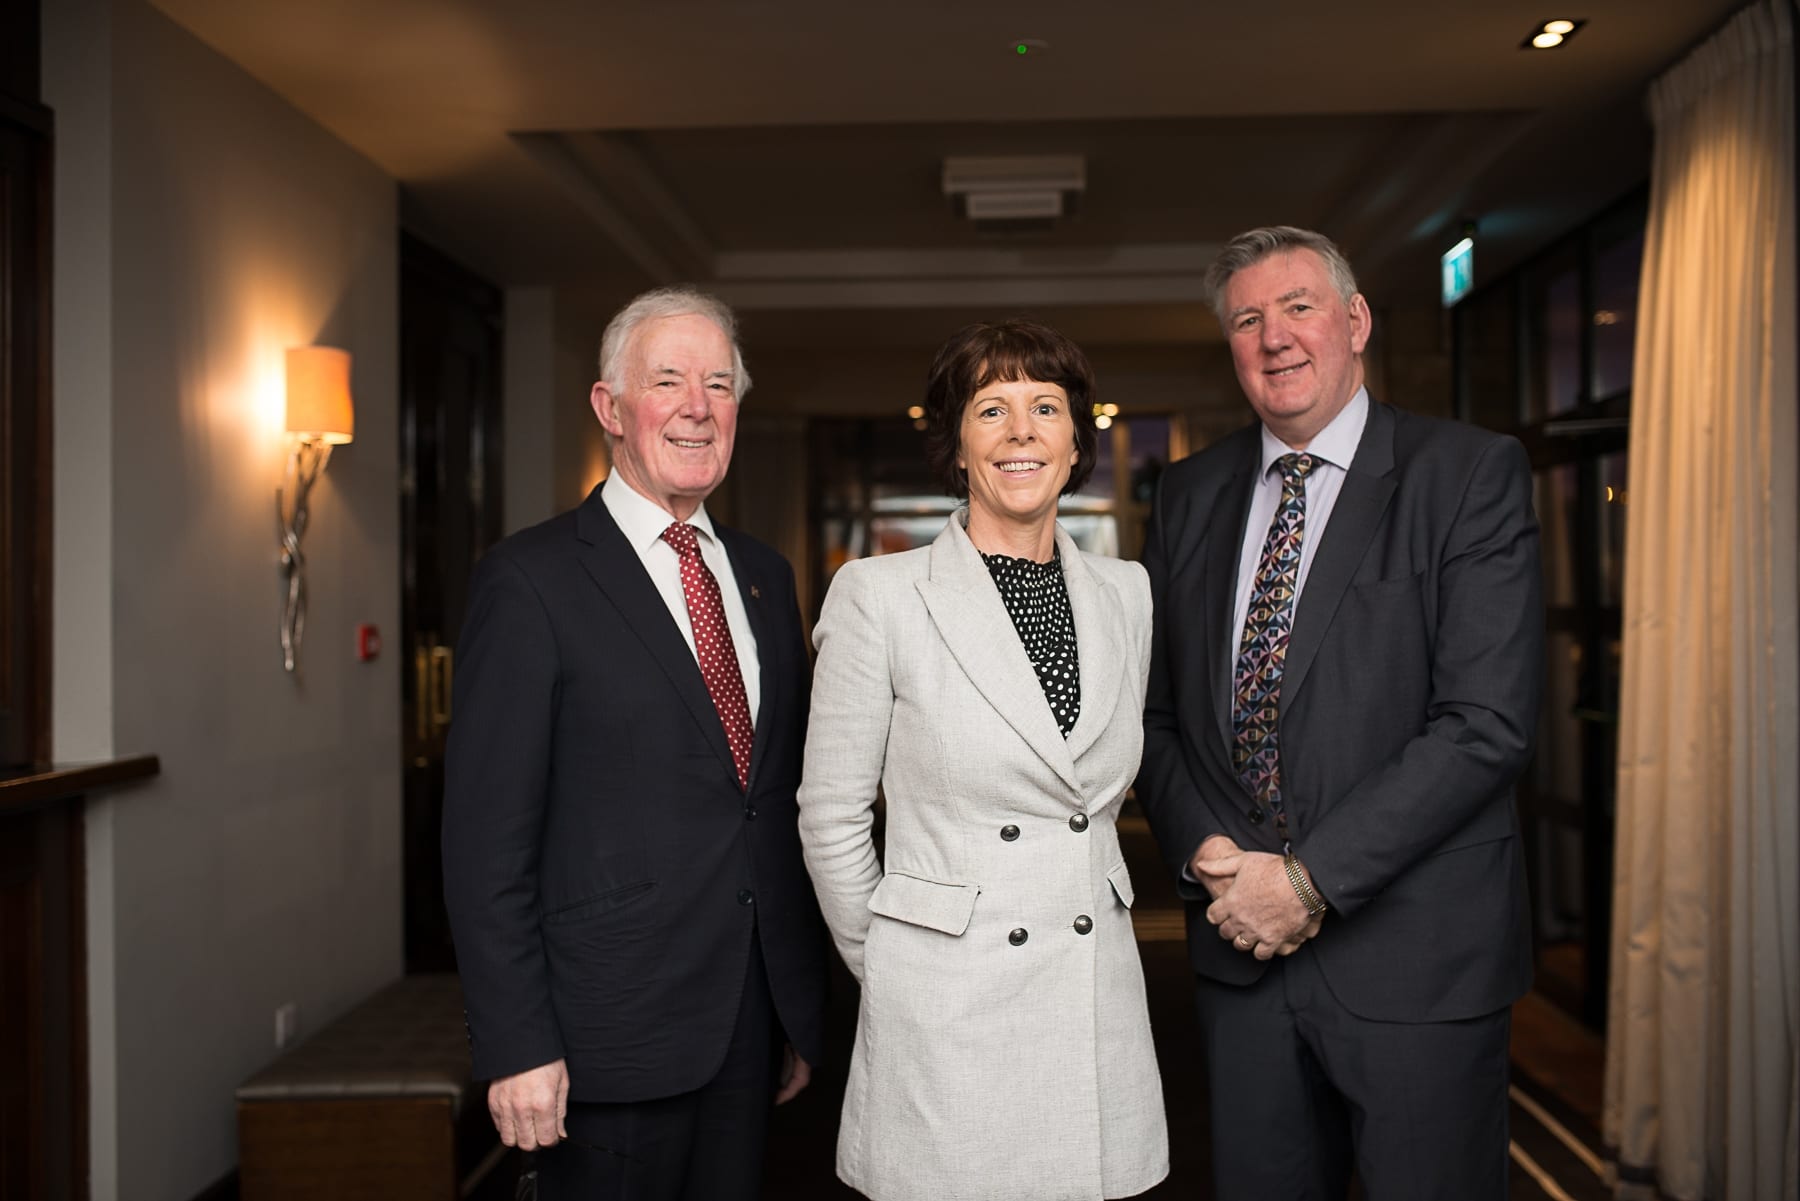 Economic Breakfast Briefing; European and Local Economic Outlook In association with the Limerick Post which took place in the Castletroy Park Hotel on Monday 11th Feb 2019:  From left to right:Pat Kearney -Rooney Auctioneers,  Lisa Kearney -Rooney Auctioneers, Dermot Graham Head of Business Banking AIB 
Image by Morning Star Photography